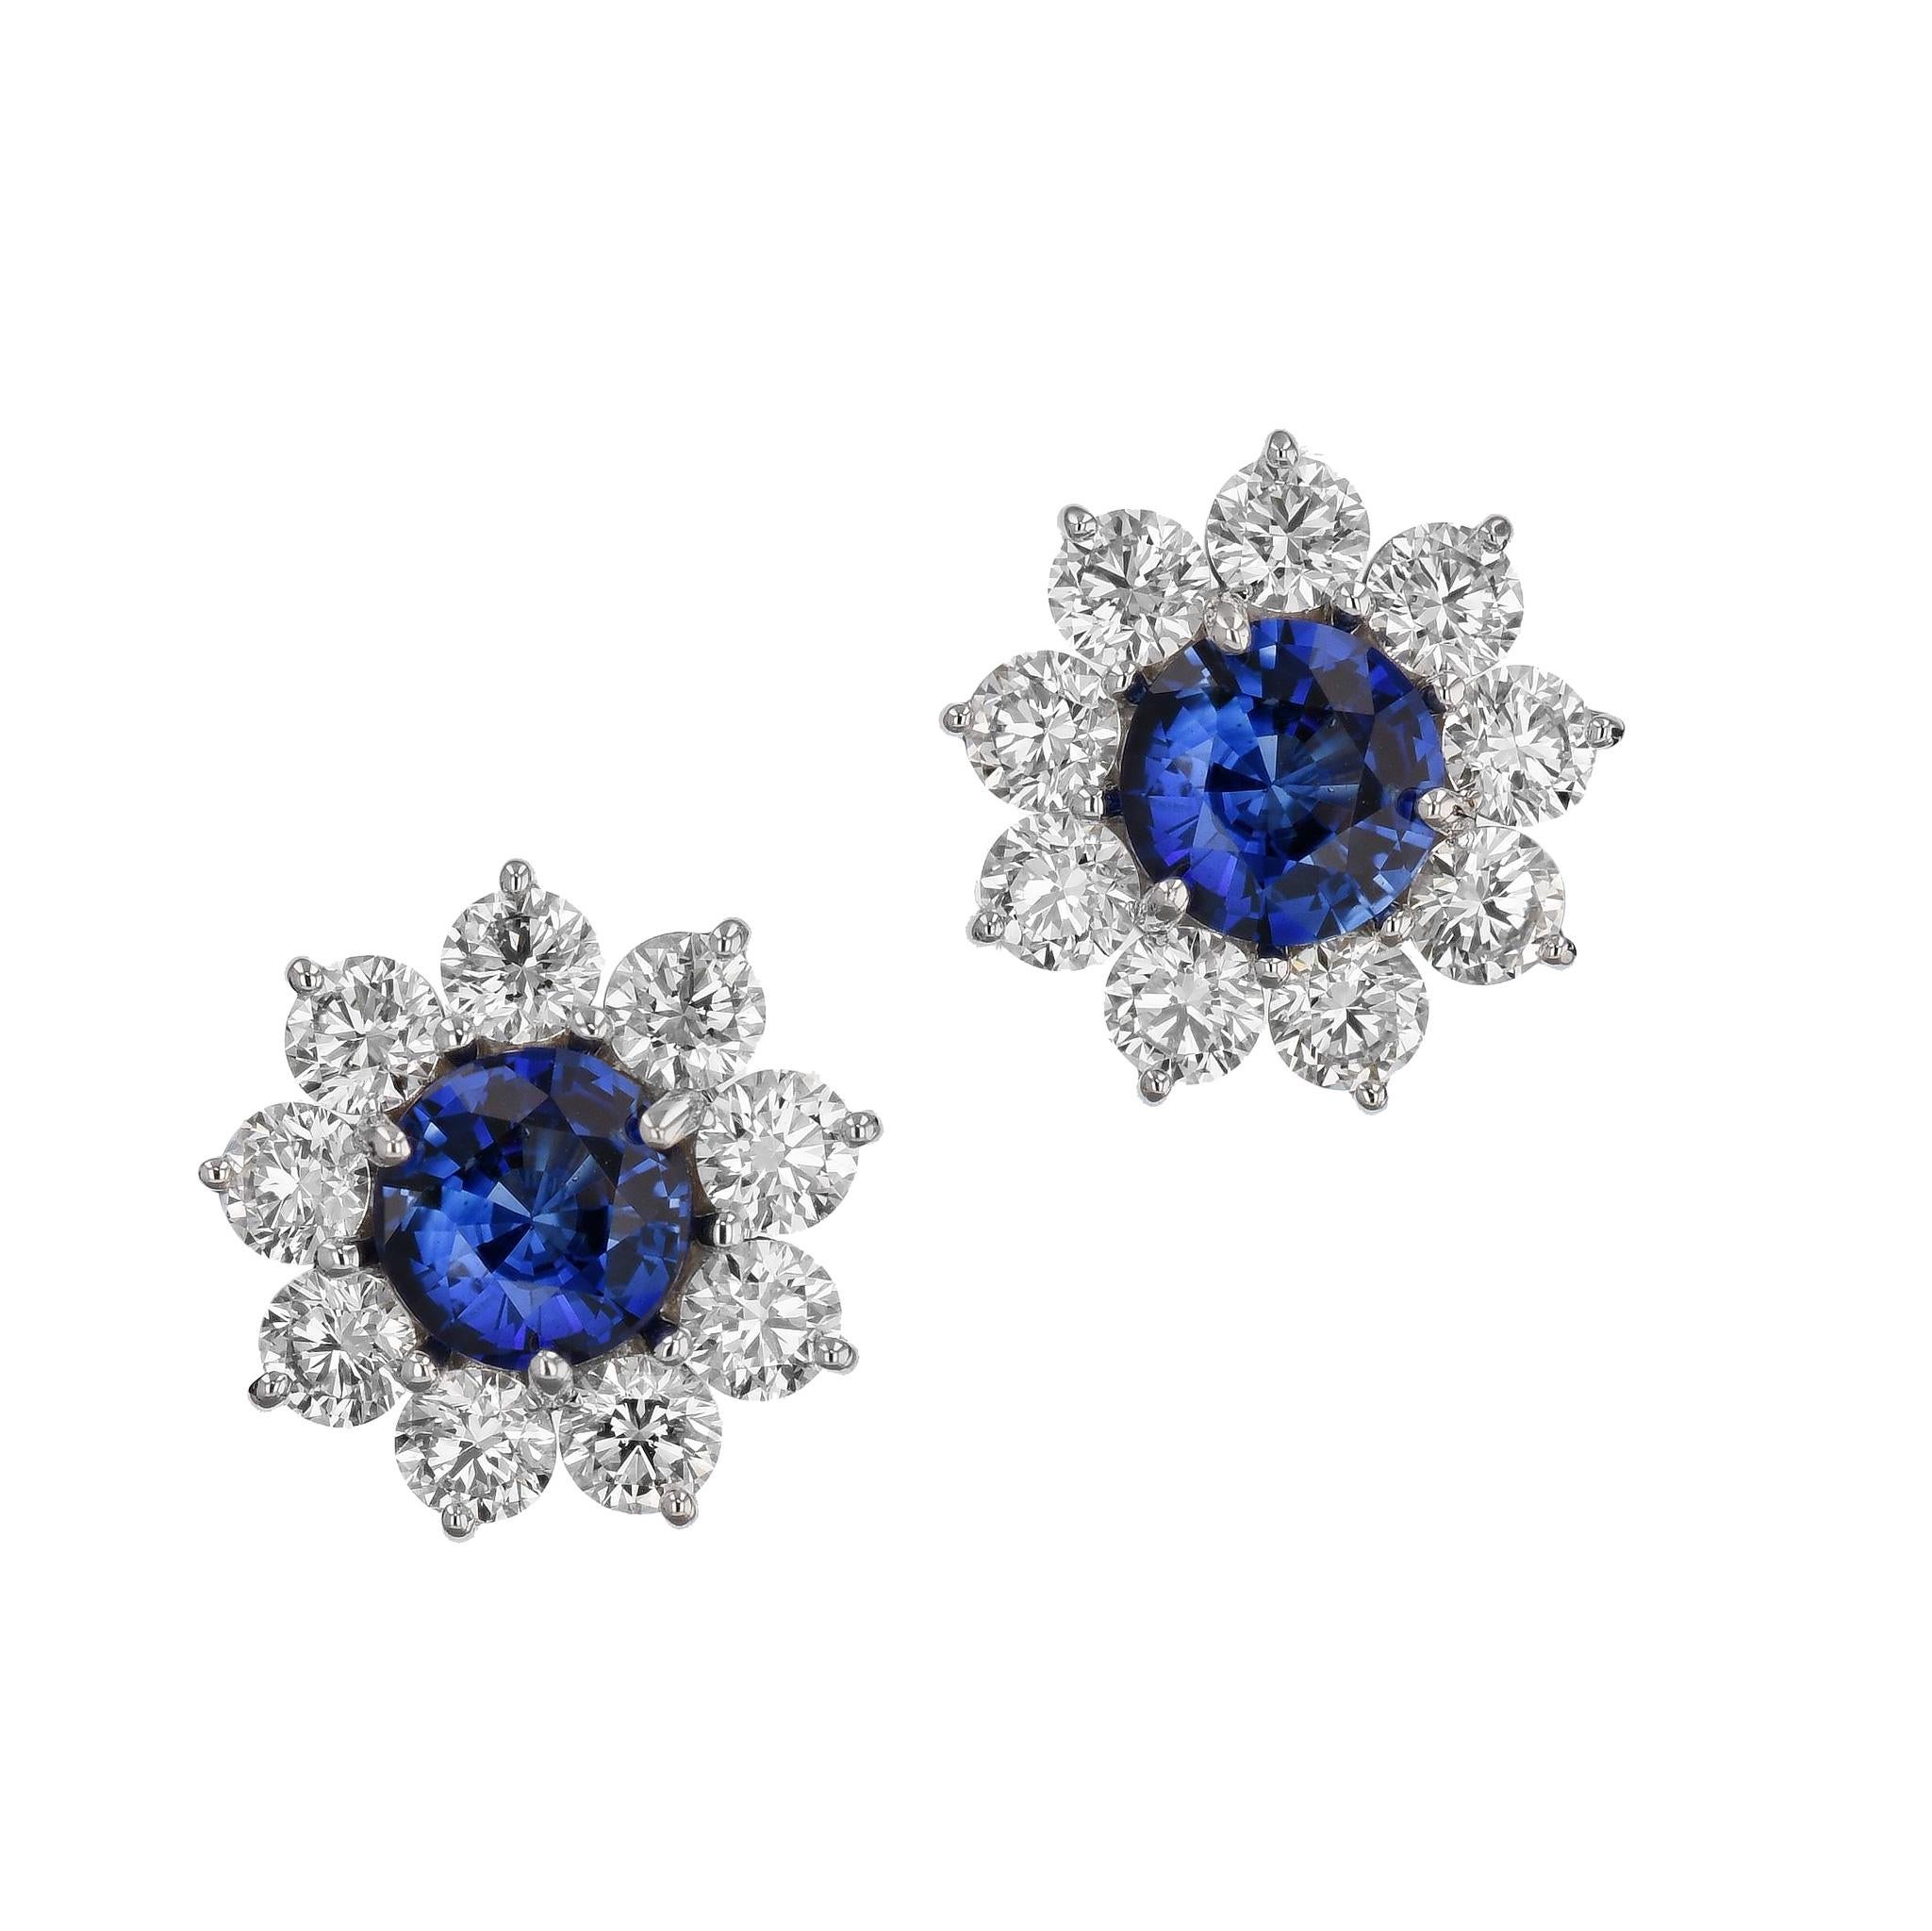 Fall in love with this breathtaking sparkle of Fine Blue Sapphire and Diamond Stud Earrings, handcrafted in luxurious 18 karat white gold.

Fine Blue Sapphire create a majestic centerpiece, and 18 perfectly cut diamonds circle around them for